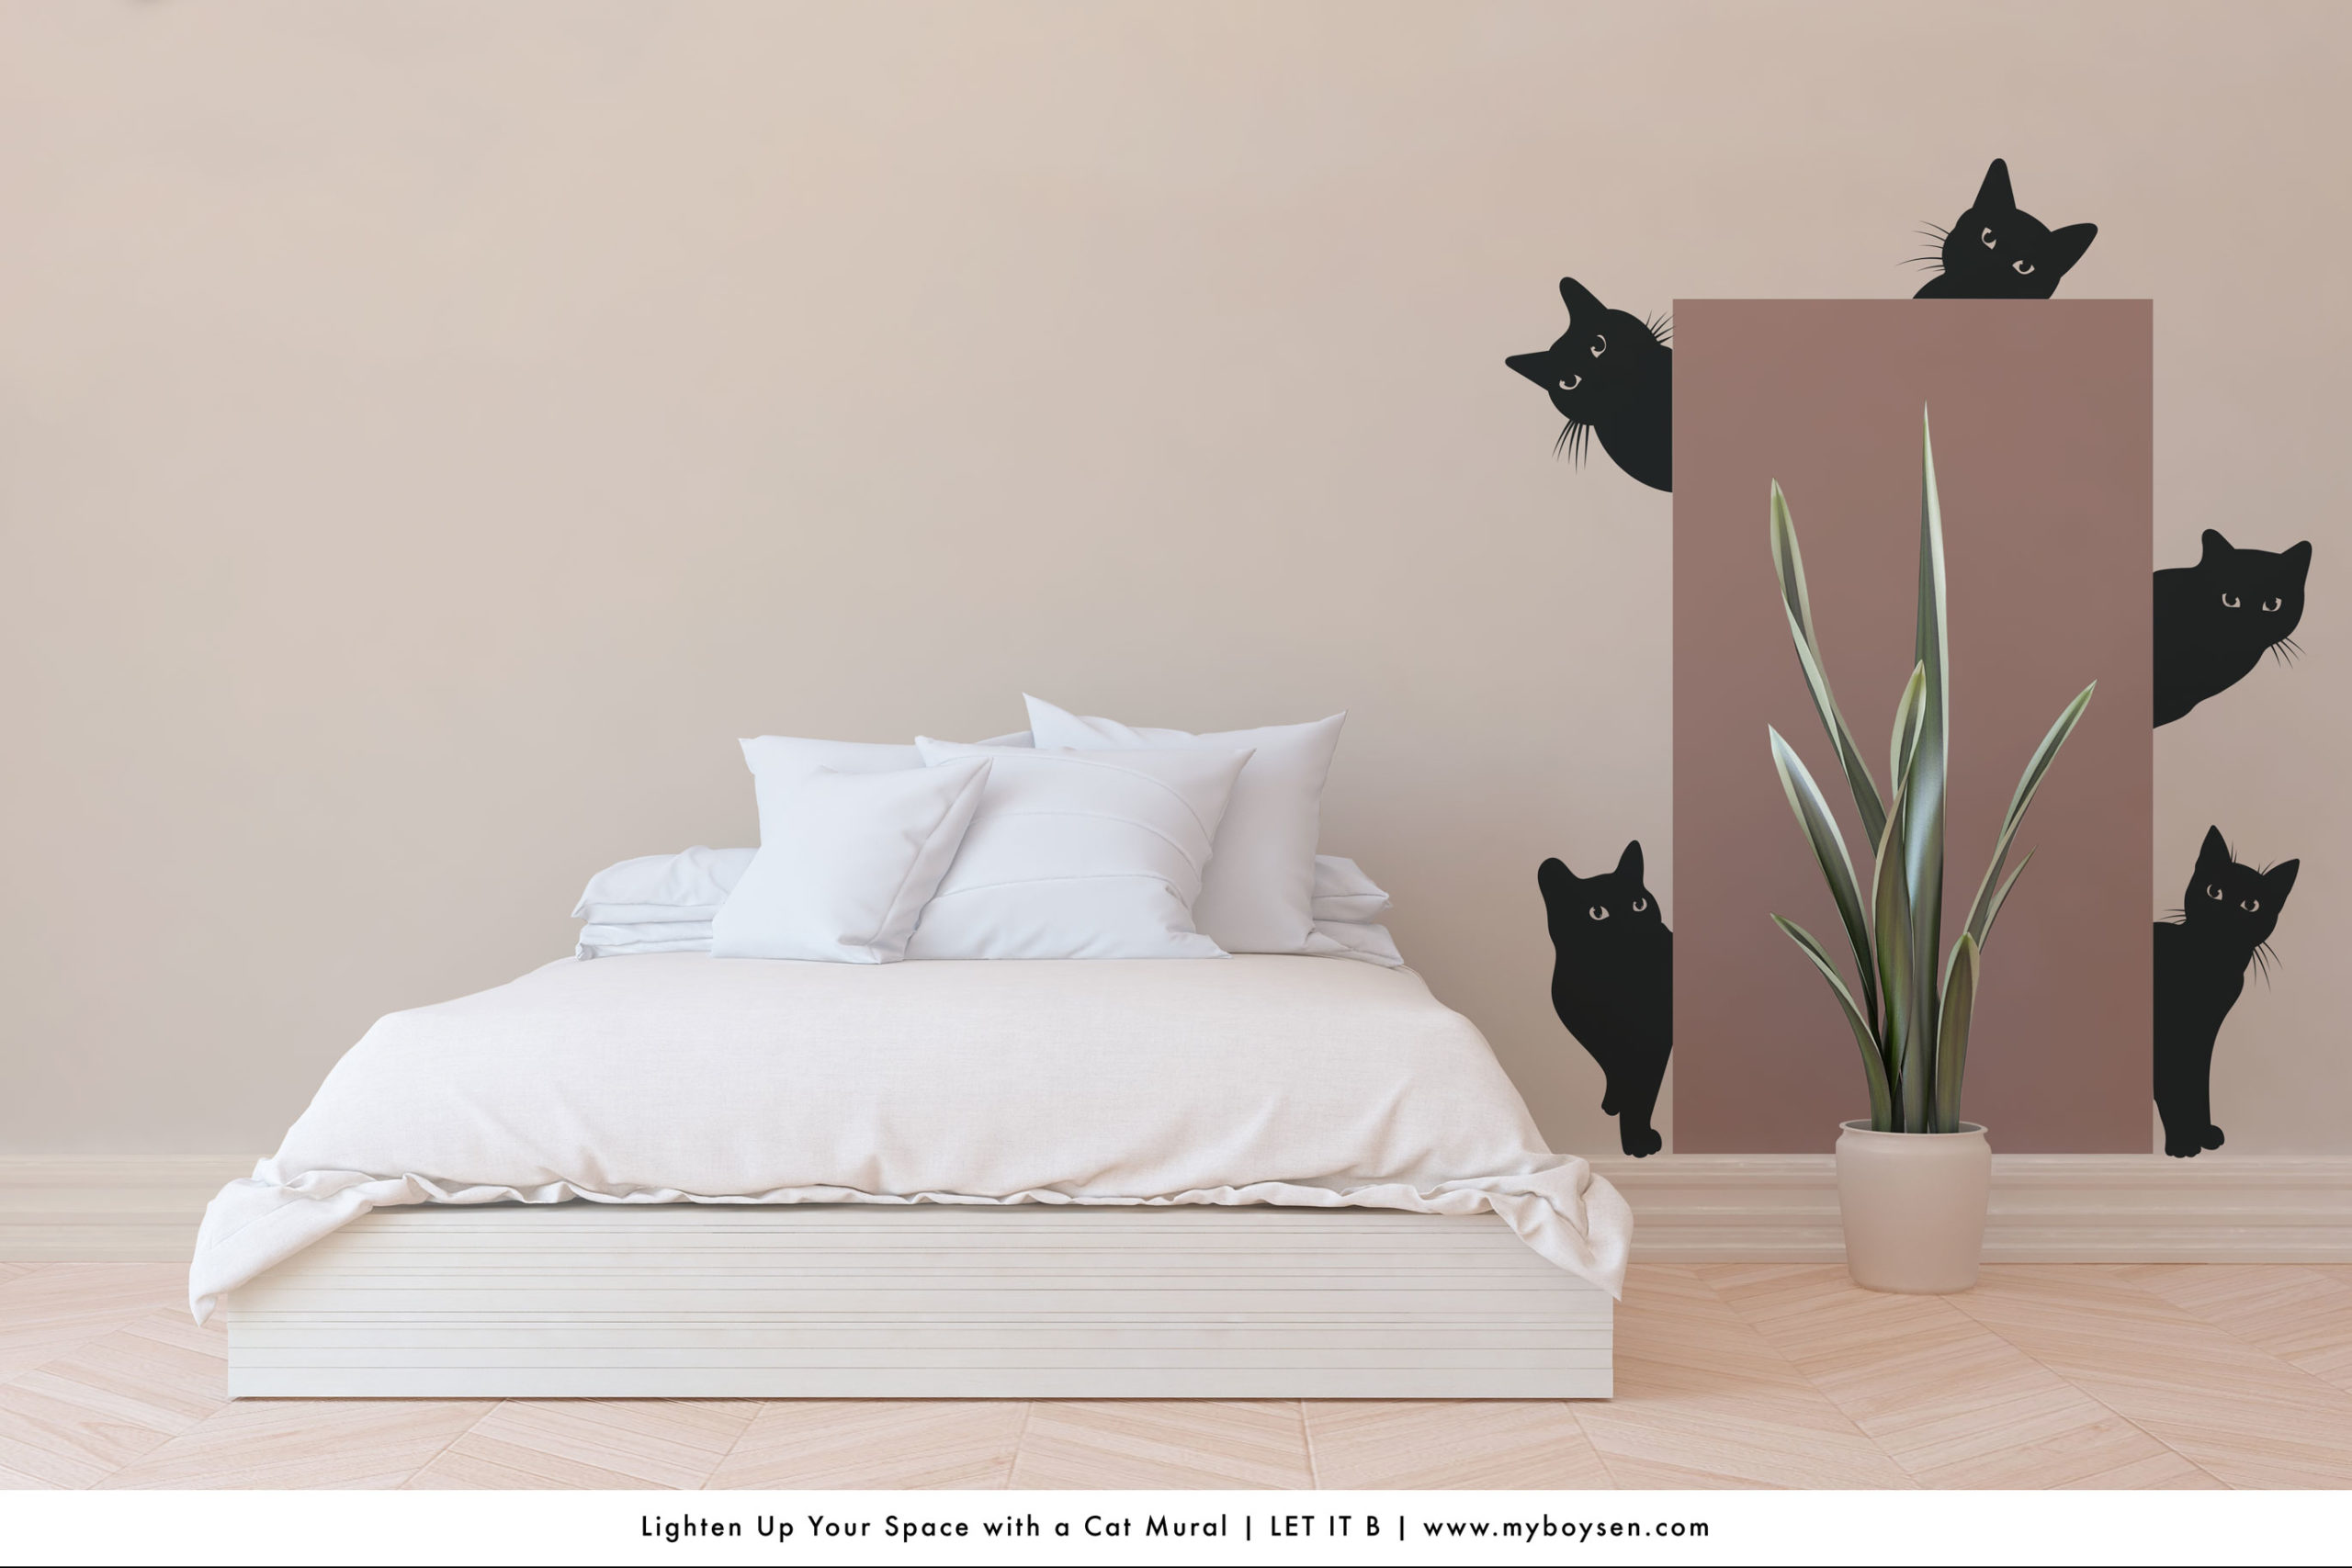 Lighten Up Your Space with a Cat Mural | MyBoysen